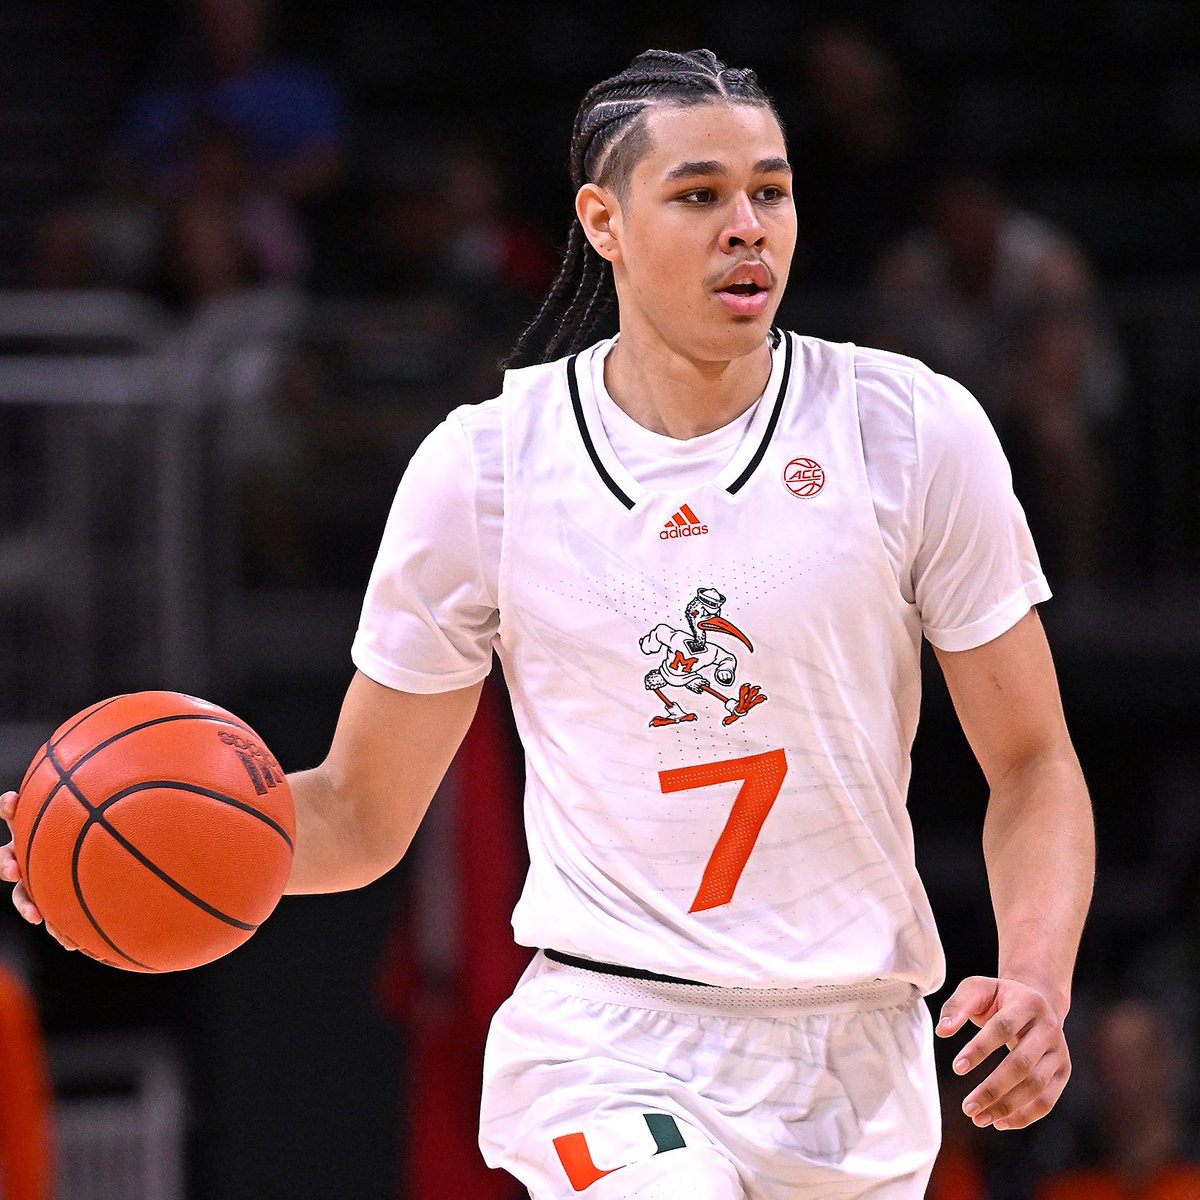 NEWS: Miami freshman Kyshawn George, a projected first-round pick, told ESPN he is forgoing his remaining college eligibility, hiring an agent and submitted paperwork to become eligible for the 2024 NBA draft. STORY: espn.com/nba/story/_/id…